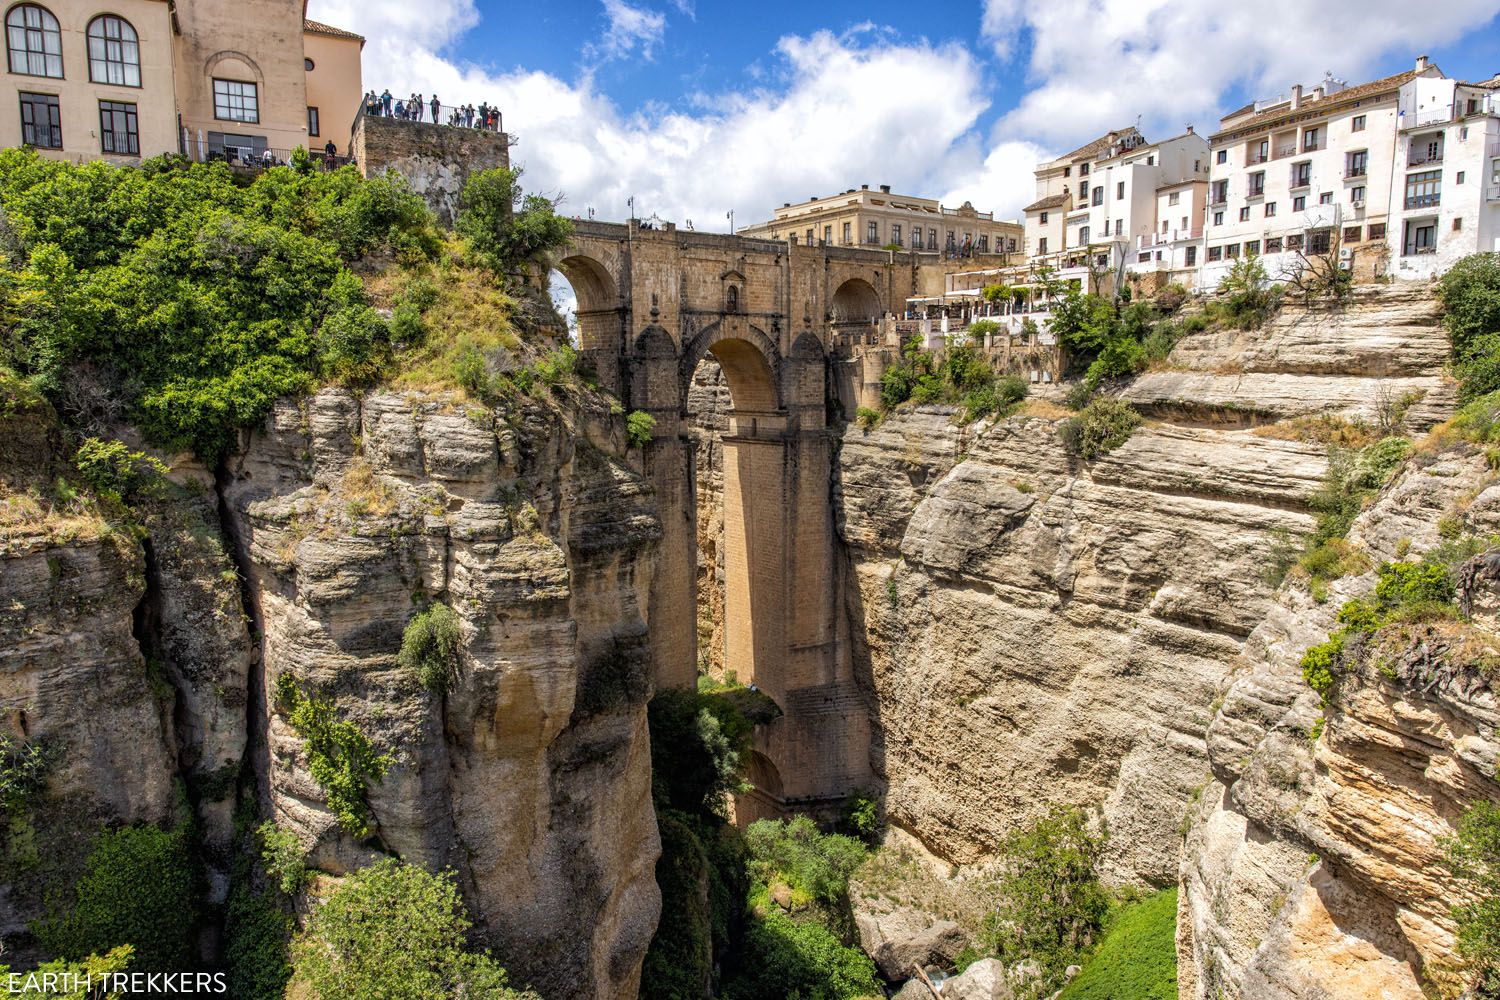 How to Visit Ronda Spain